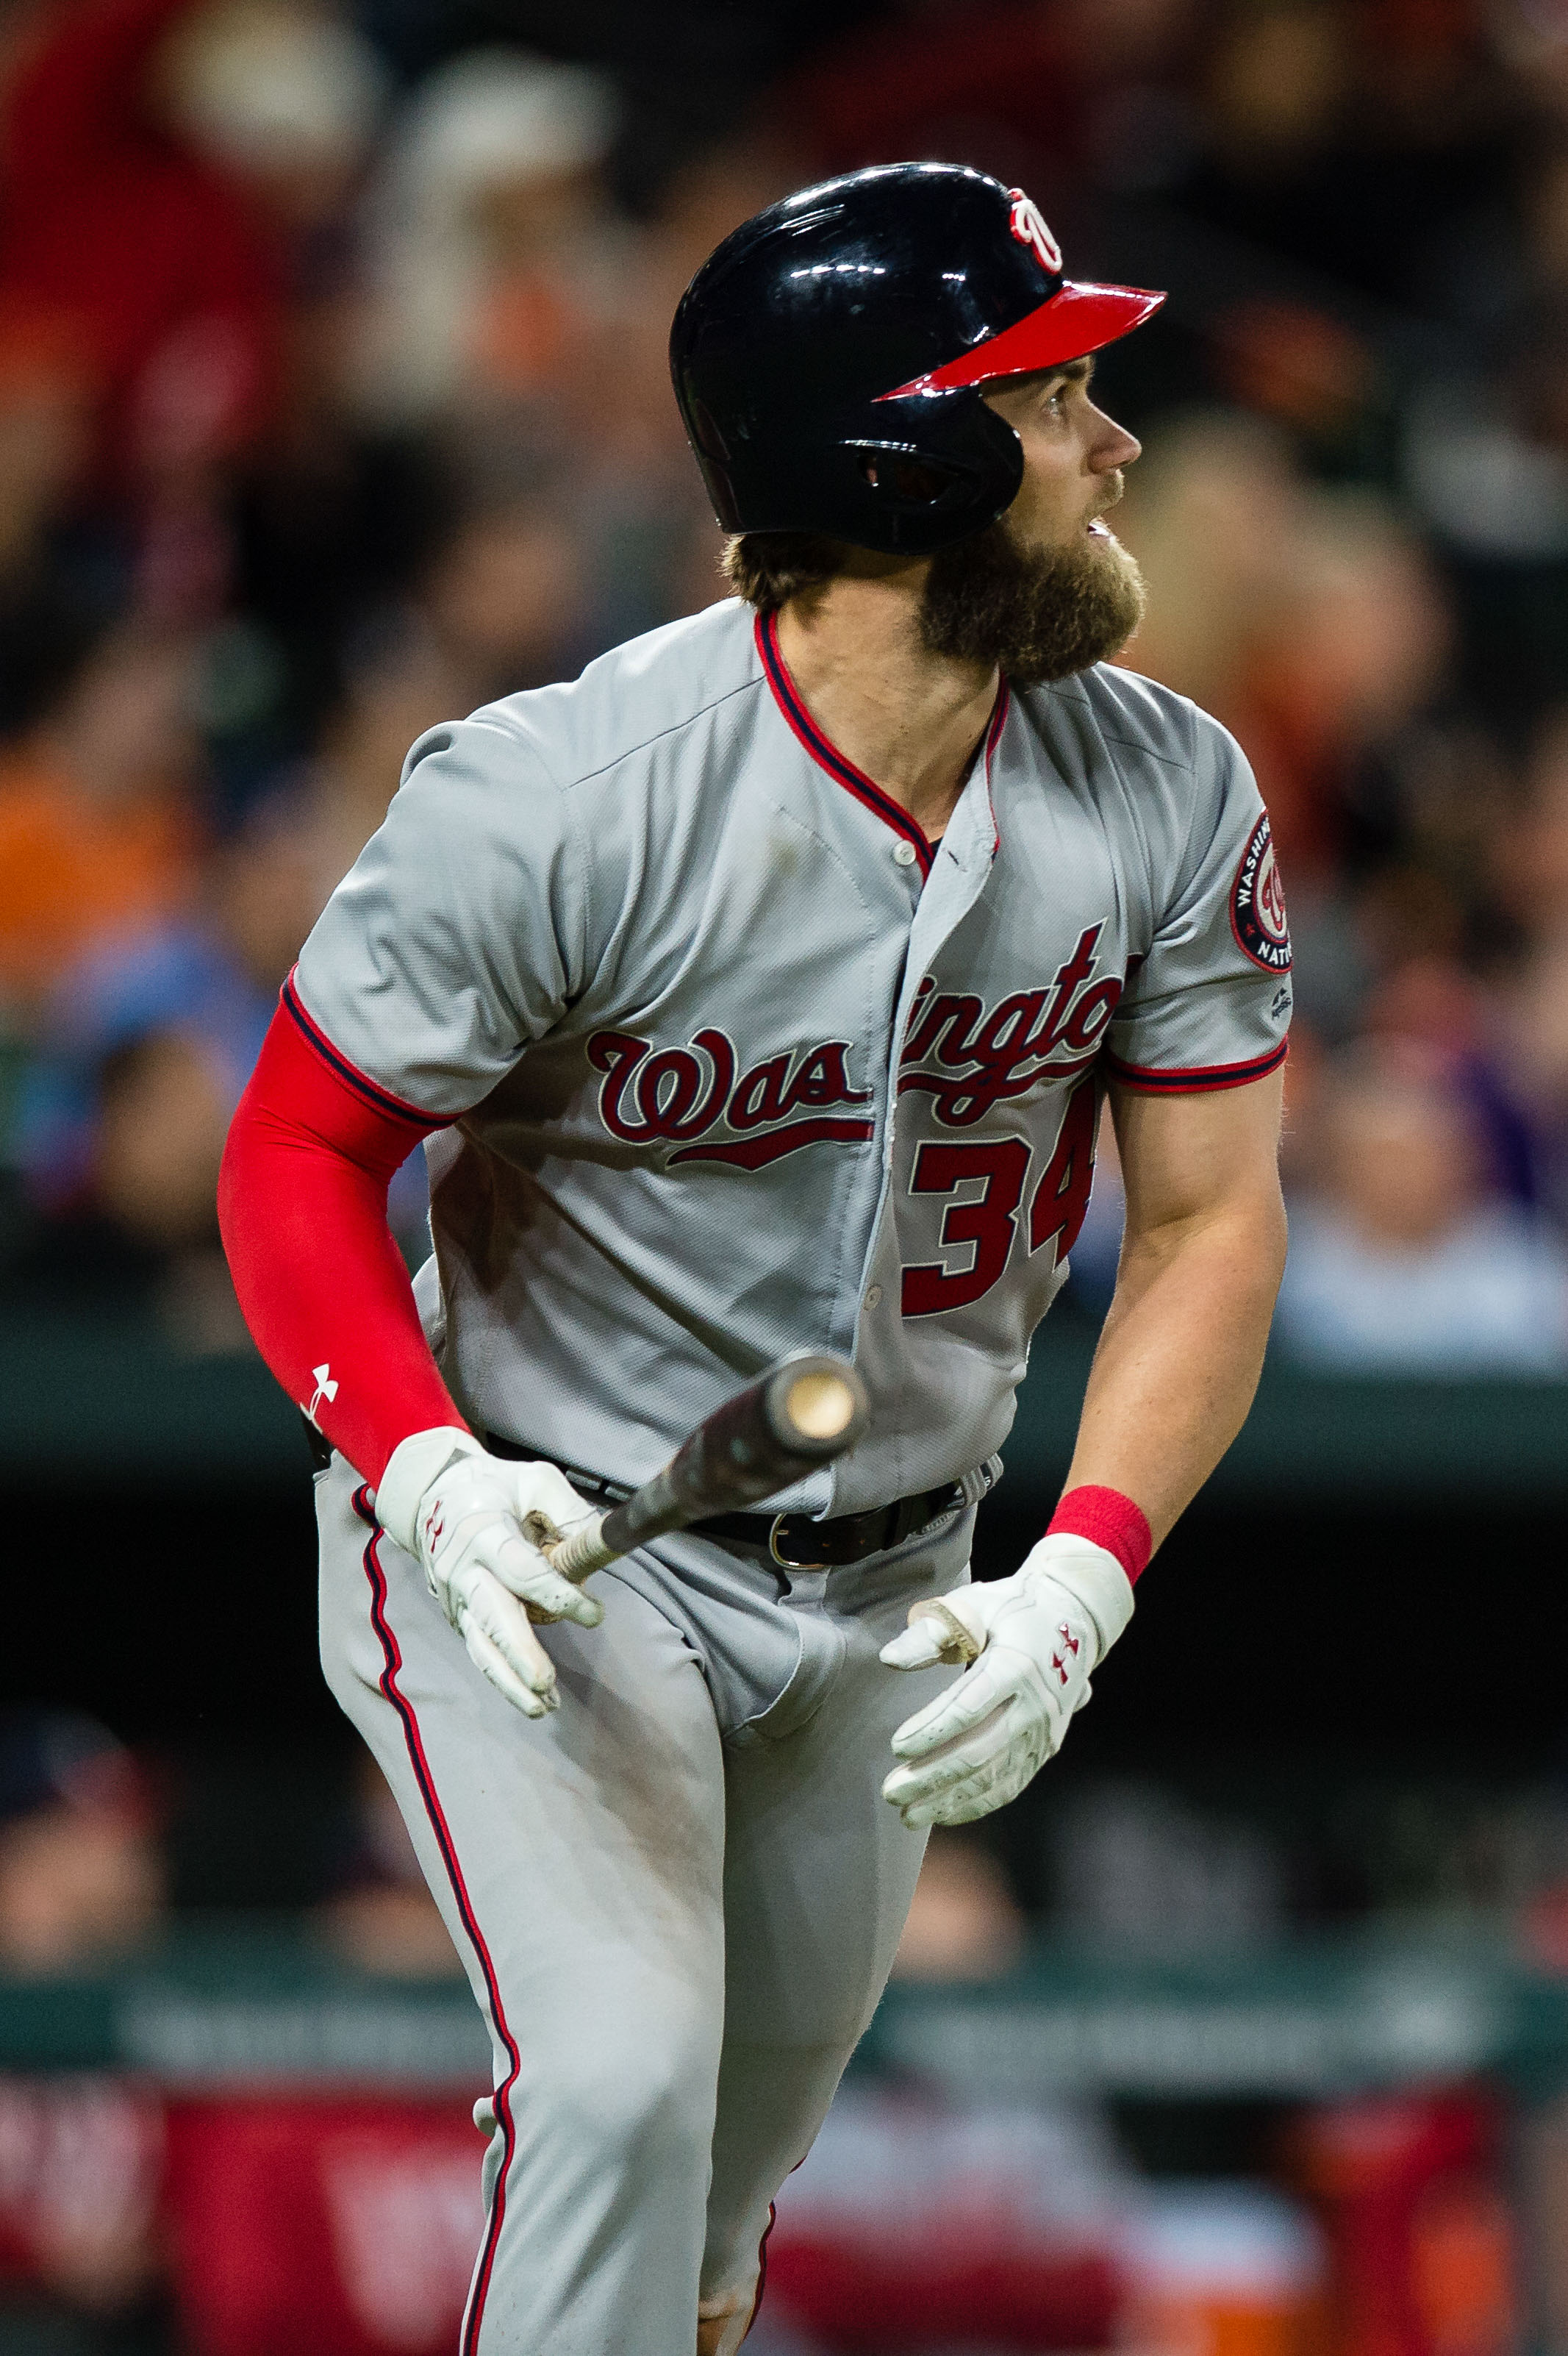 Bryce Harper free agency: Mariners could stay relevant with star